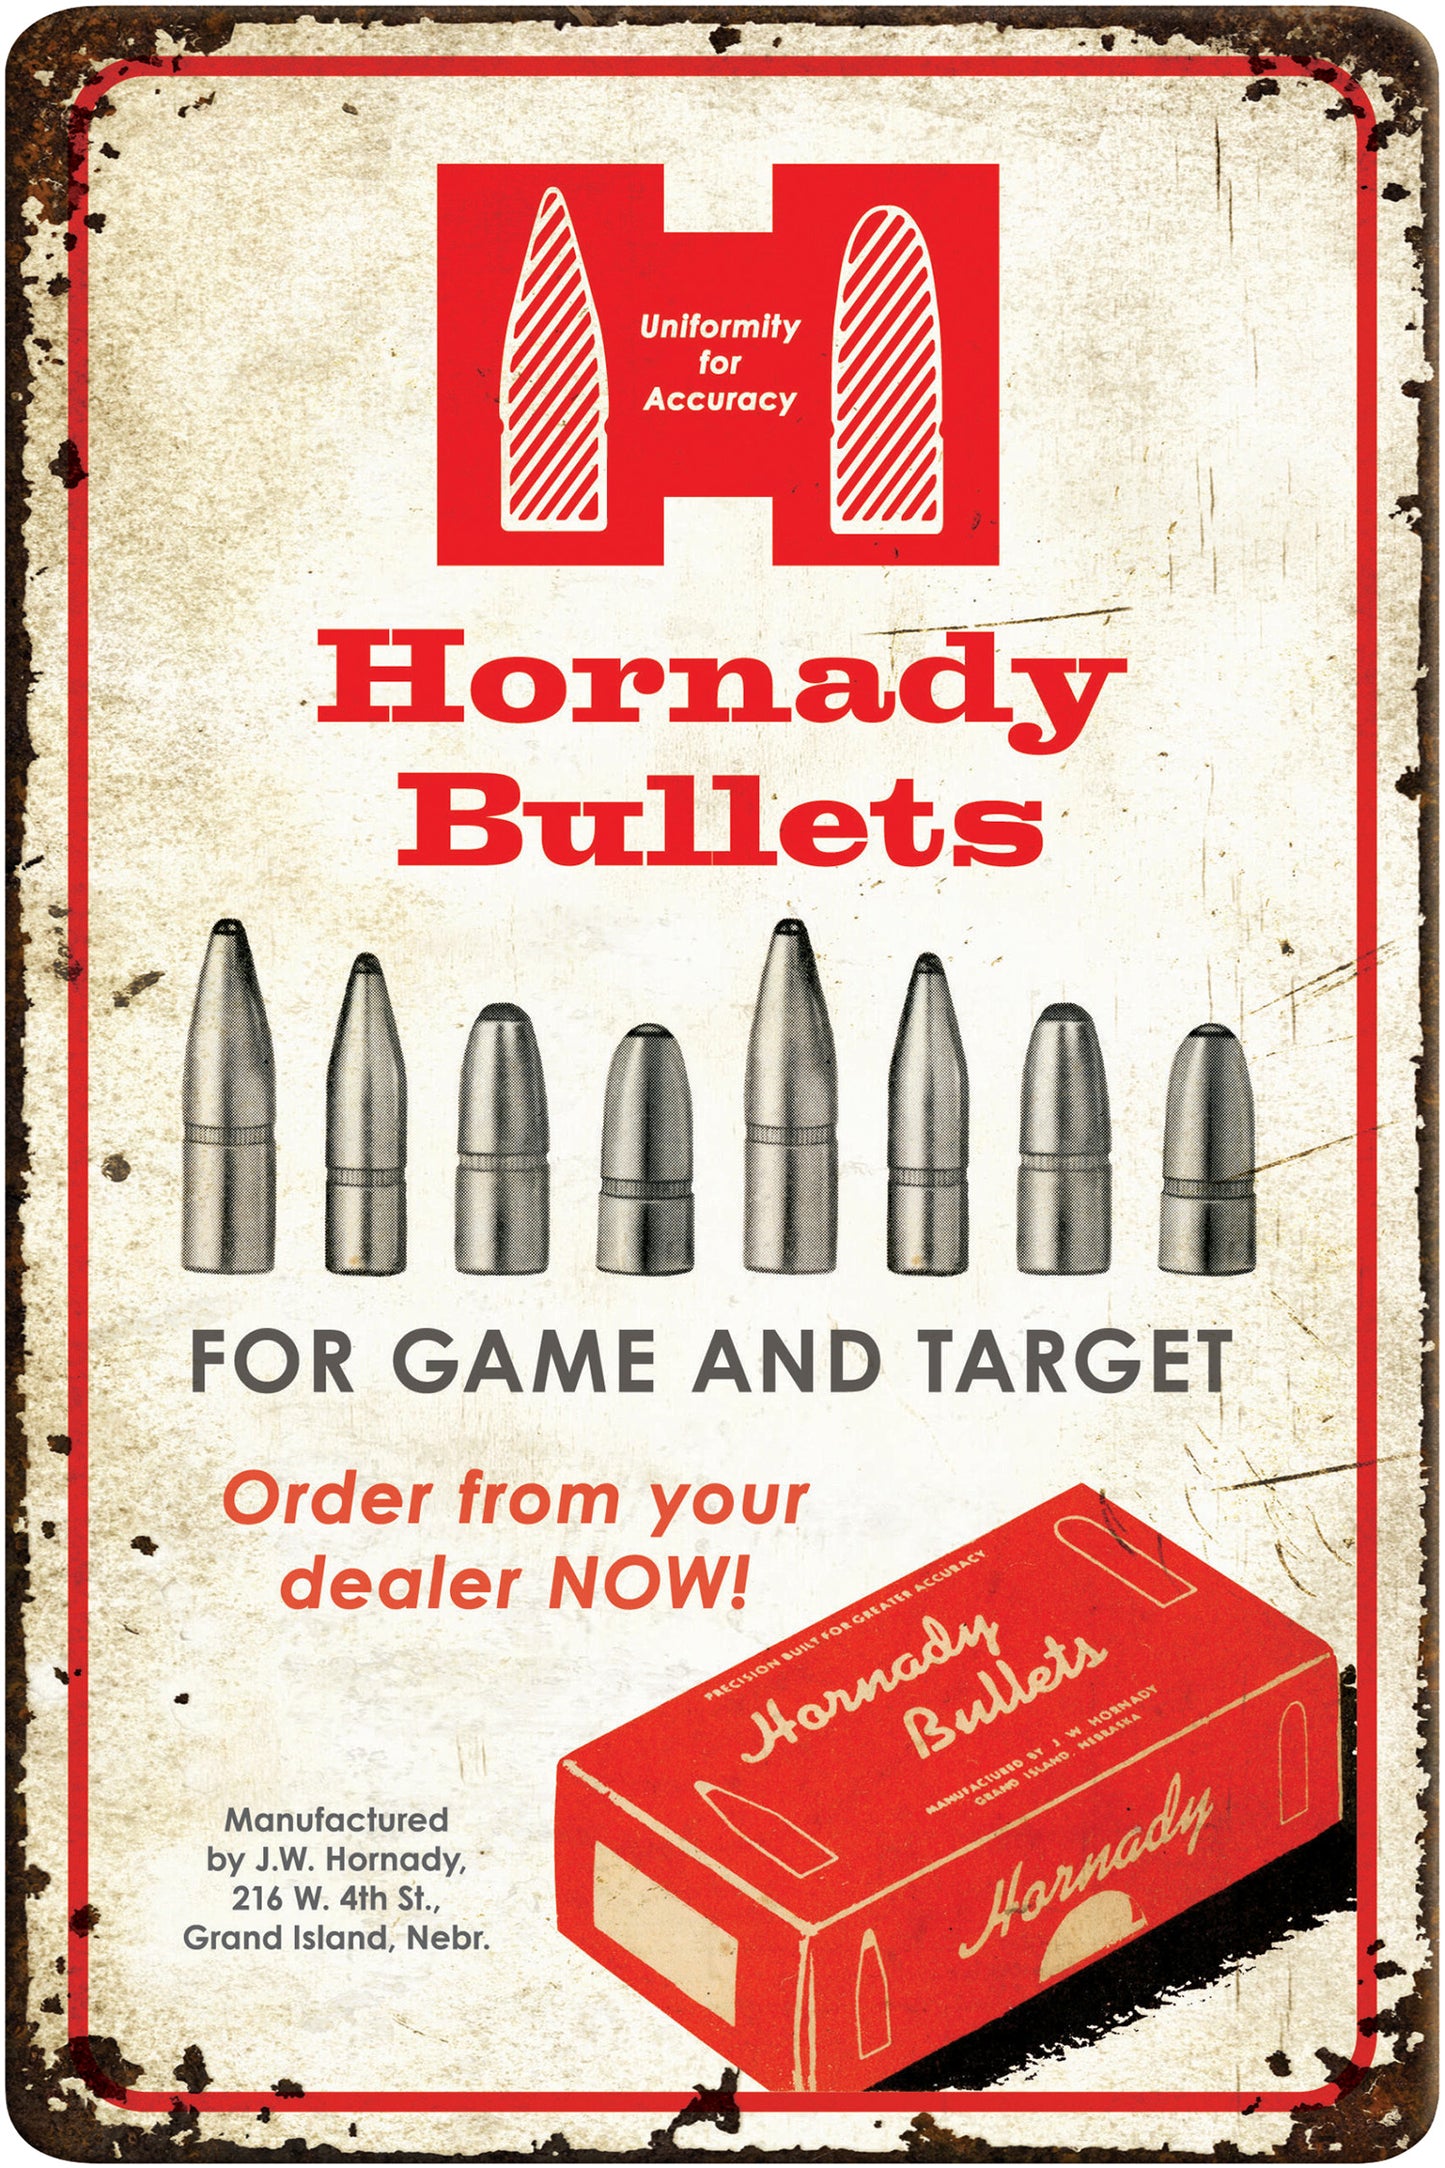 Hornady Bullets Tin Sign Rustic Red White Aluminum 12" x 18"